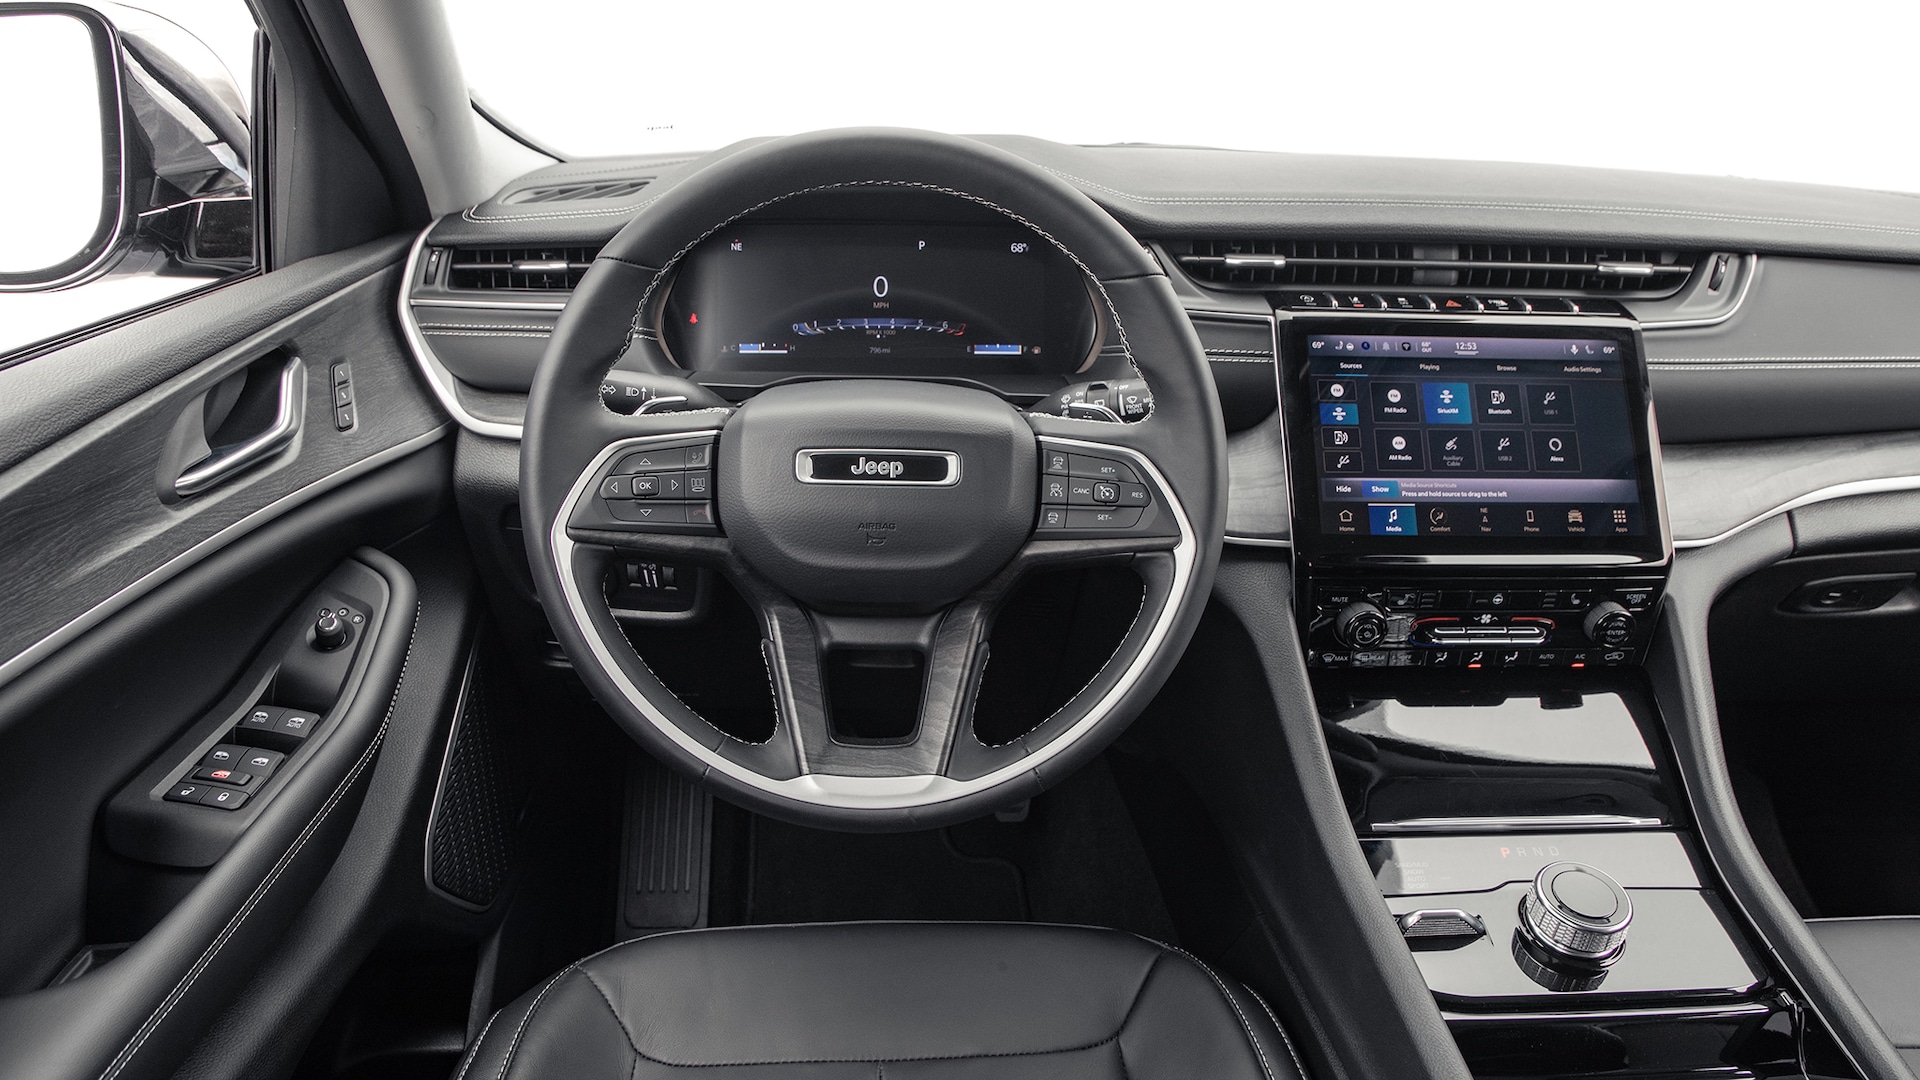 2022 Jeep Grand Cherokee L Interior Review: Great First Impression